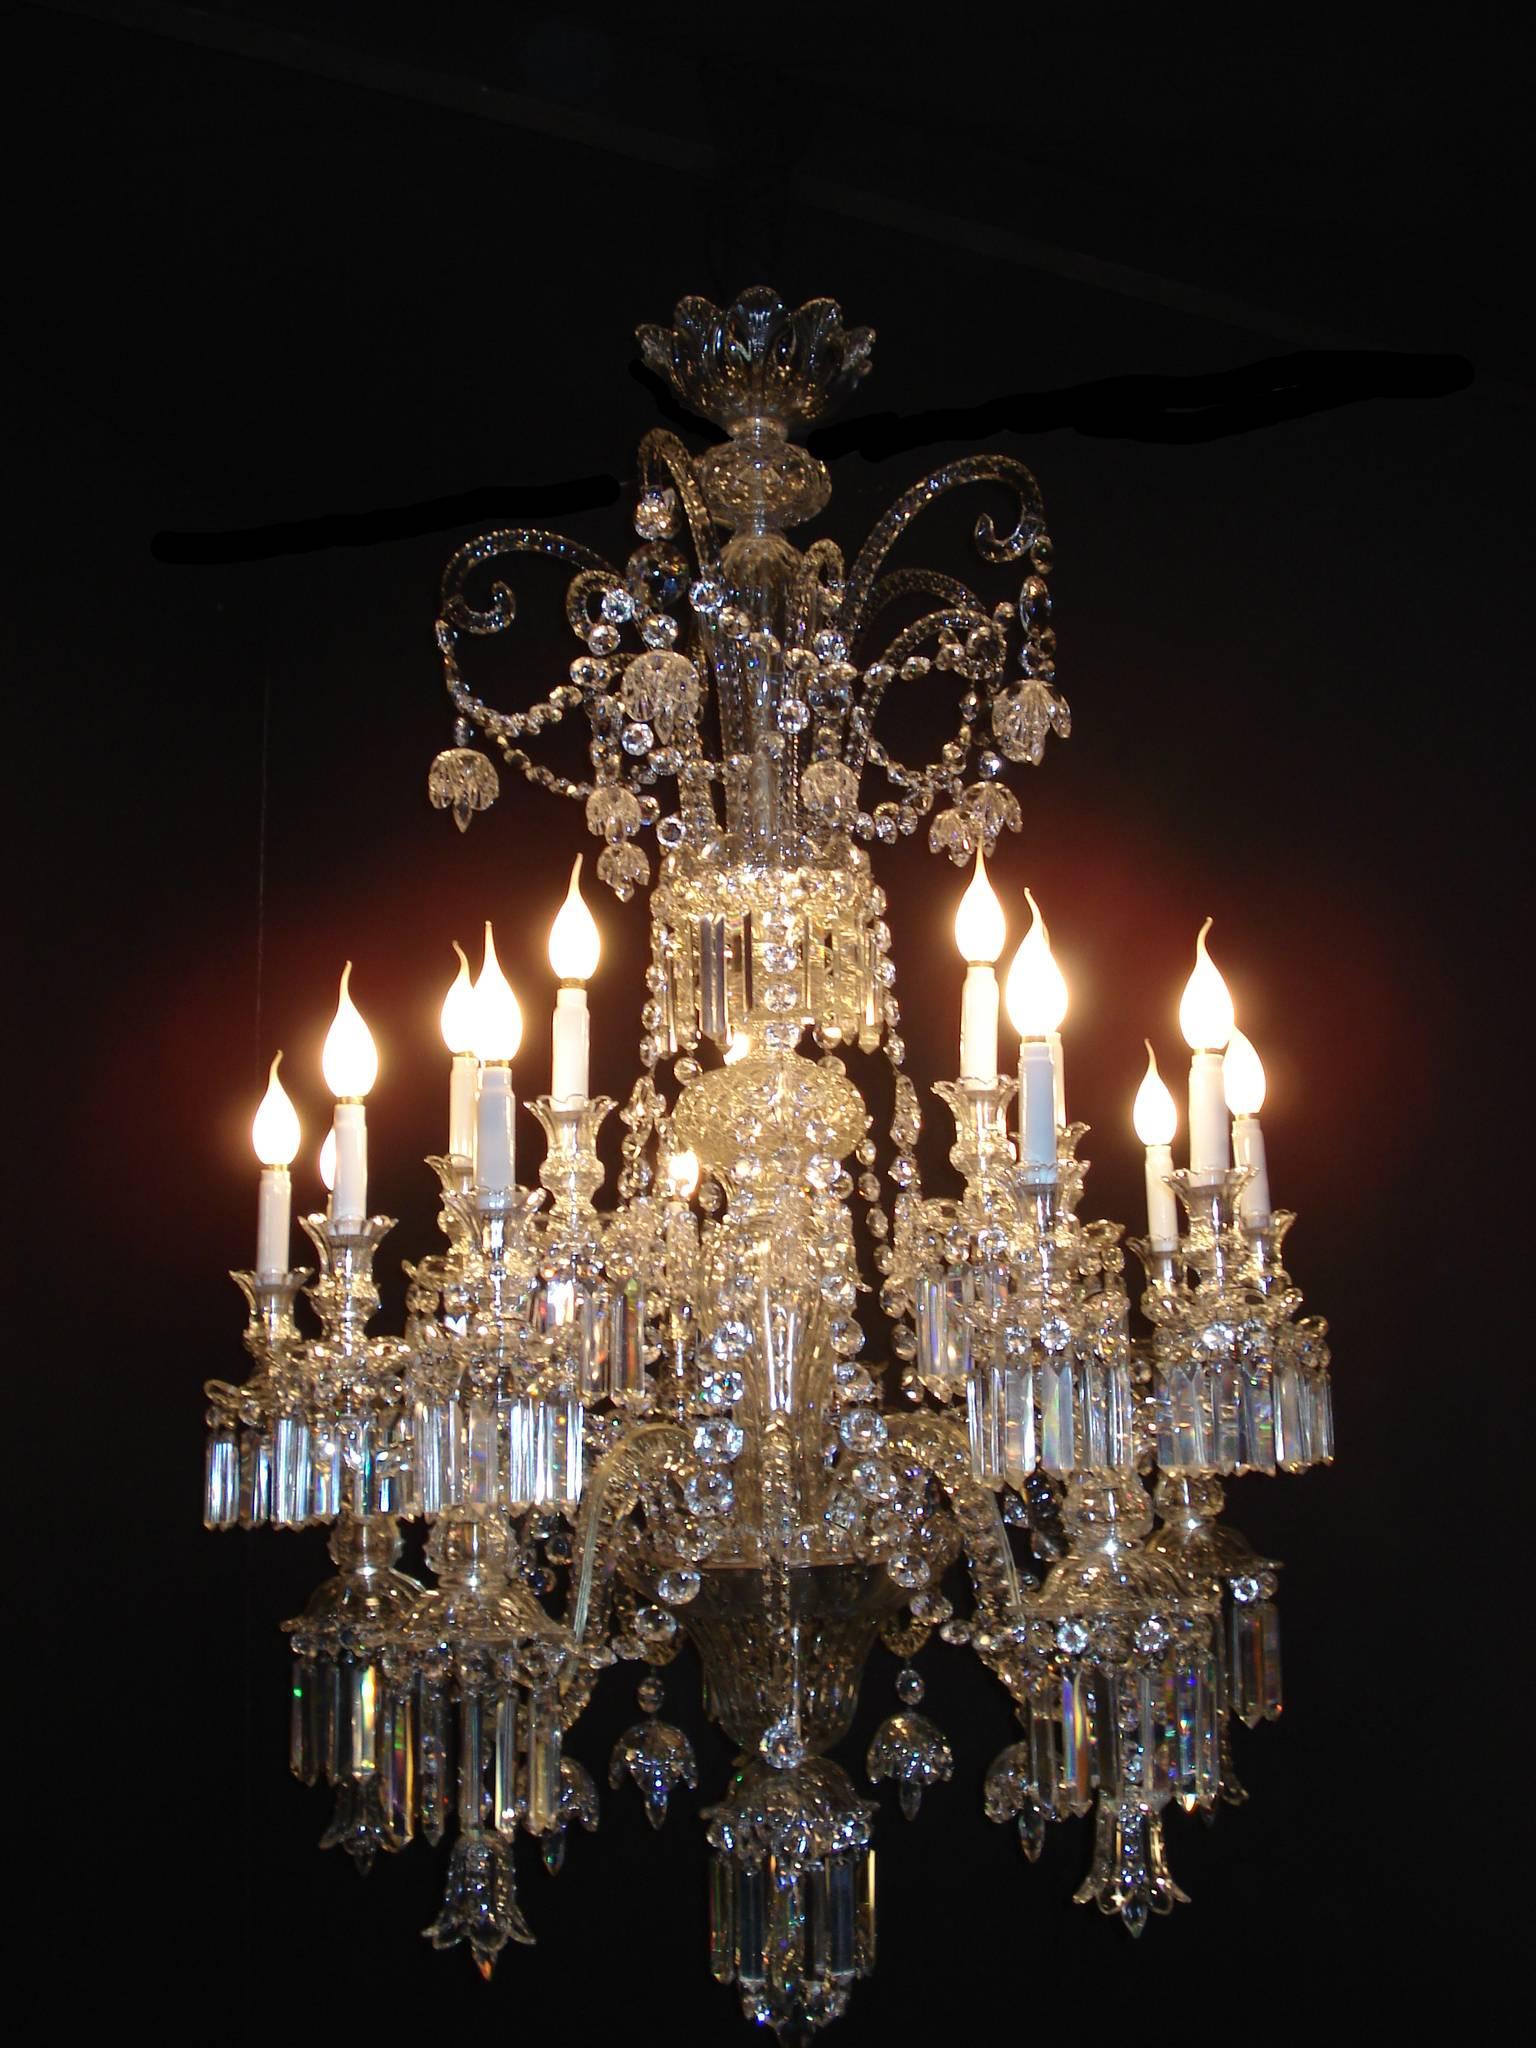 Outstanding and are Original Baccarat Chandelier .The supporting structure is made of silver plated brass. The central rod is solid iron. The chandelier states no signing because at that time (1825) the Baccarat did not sign their productions.